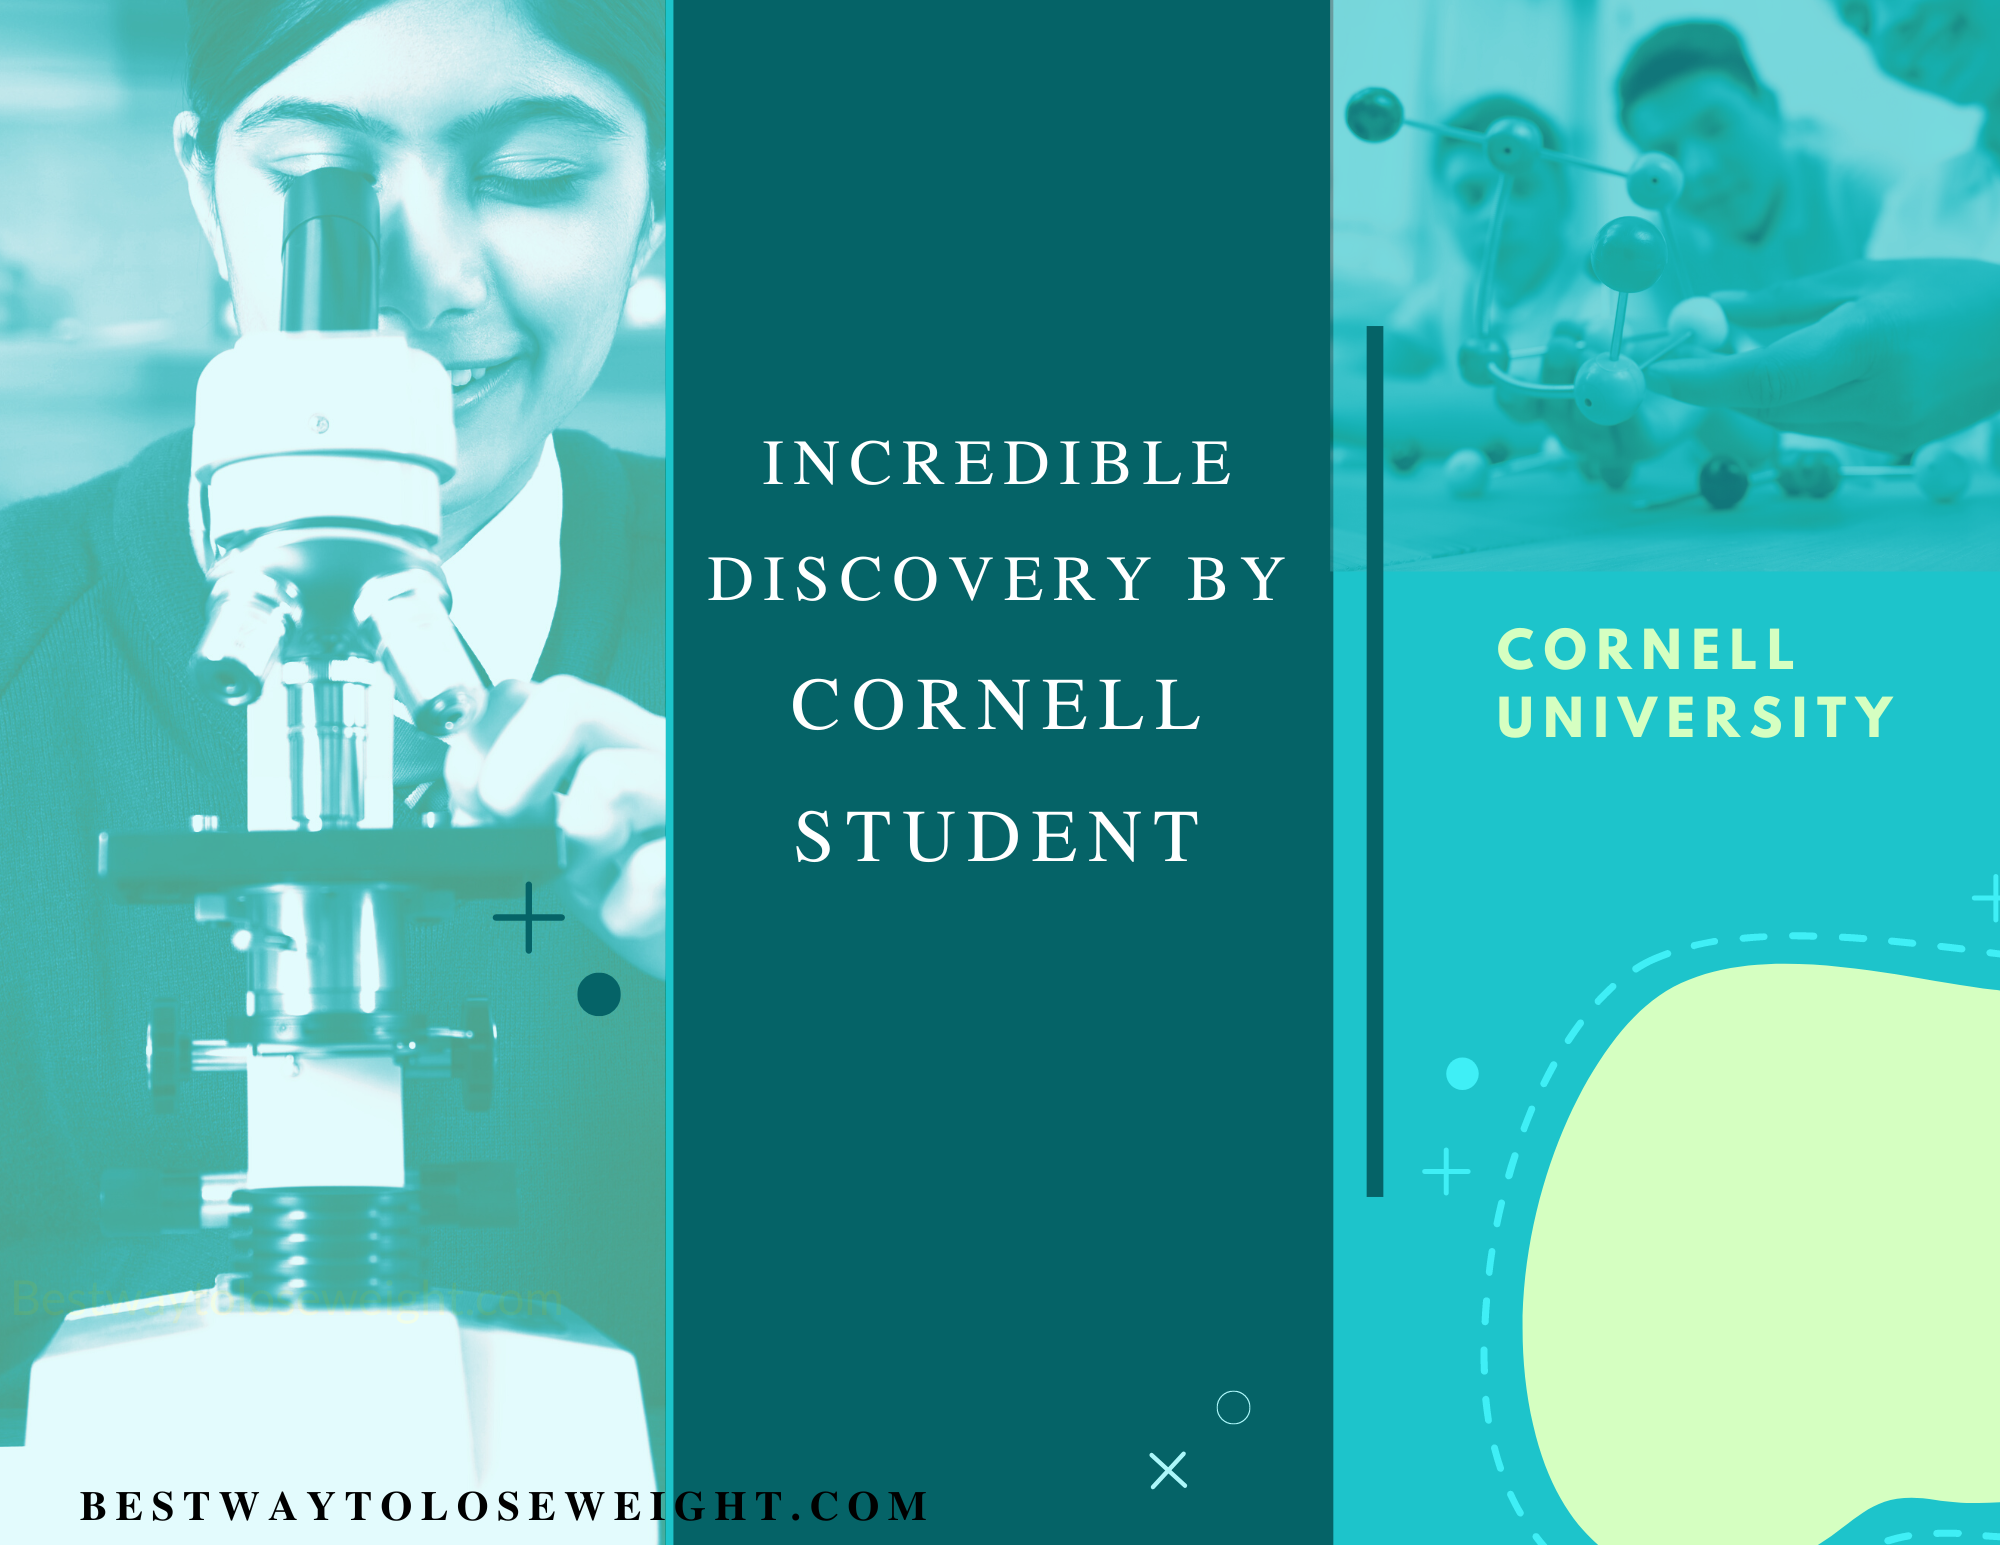 Incredible Discovery By Cornell Student